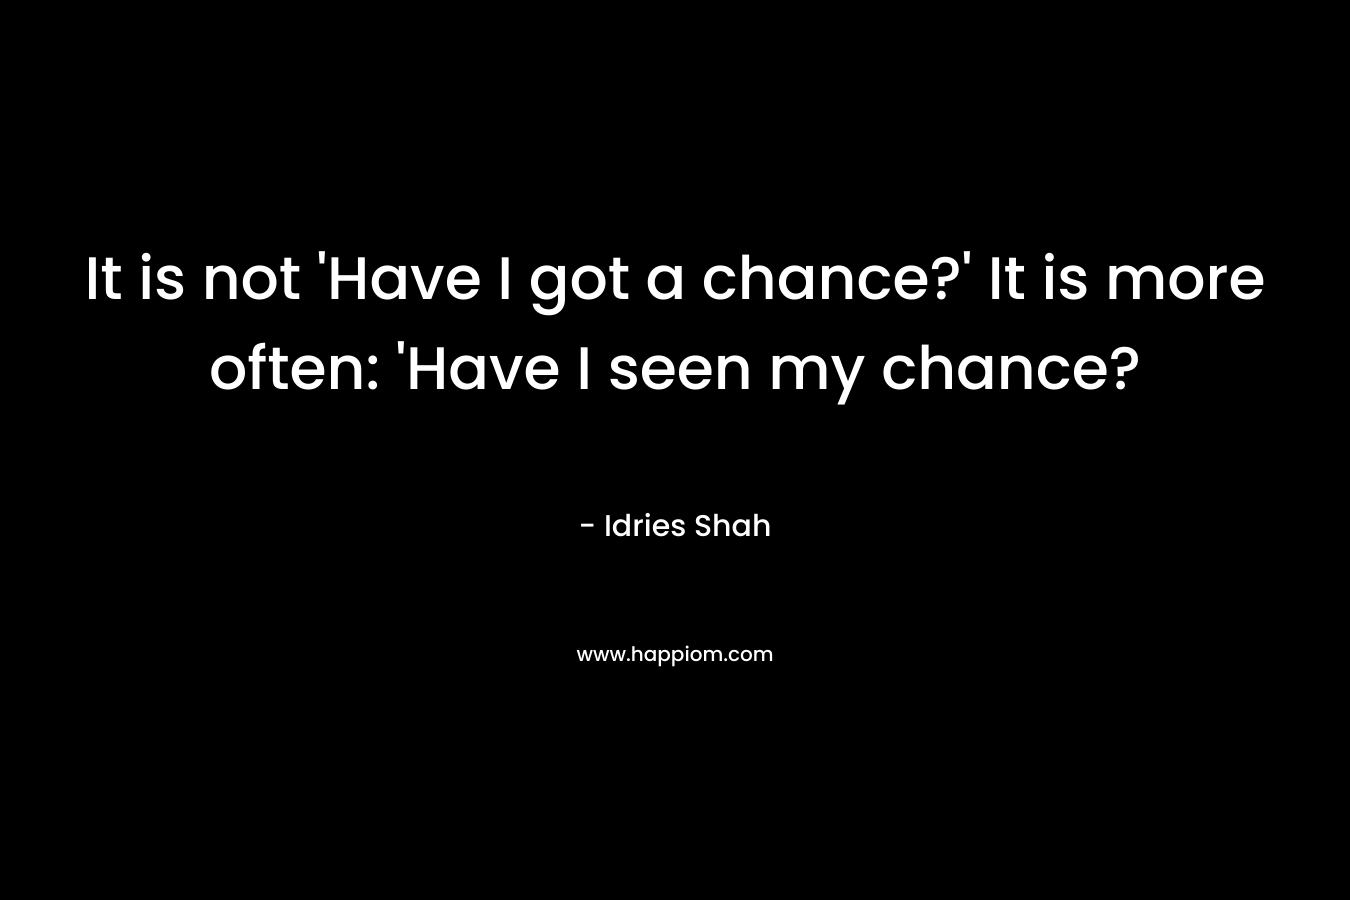 It is not 'Have I got a chance?' It is more often: 'Have I seen my chance?